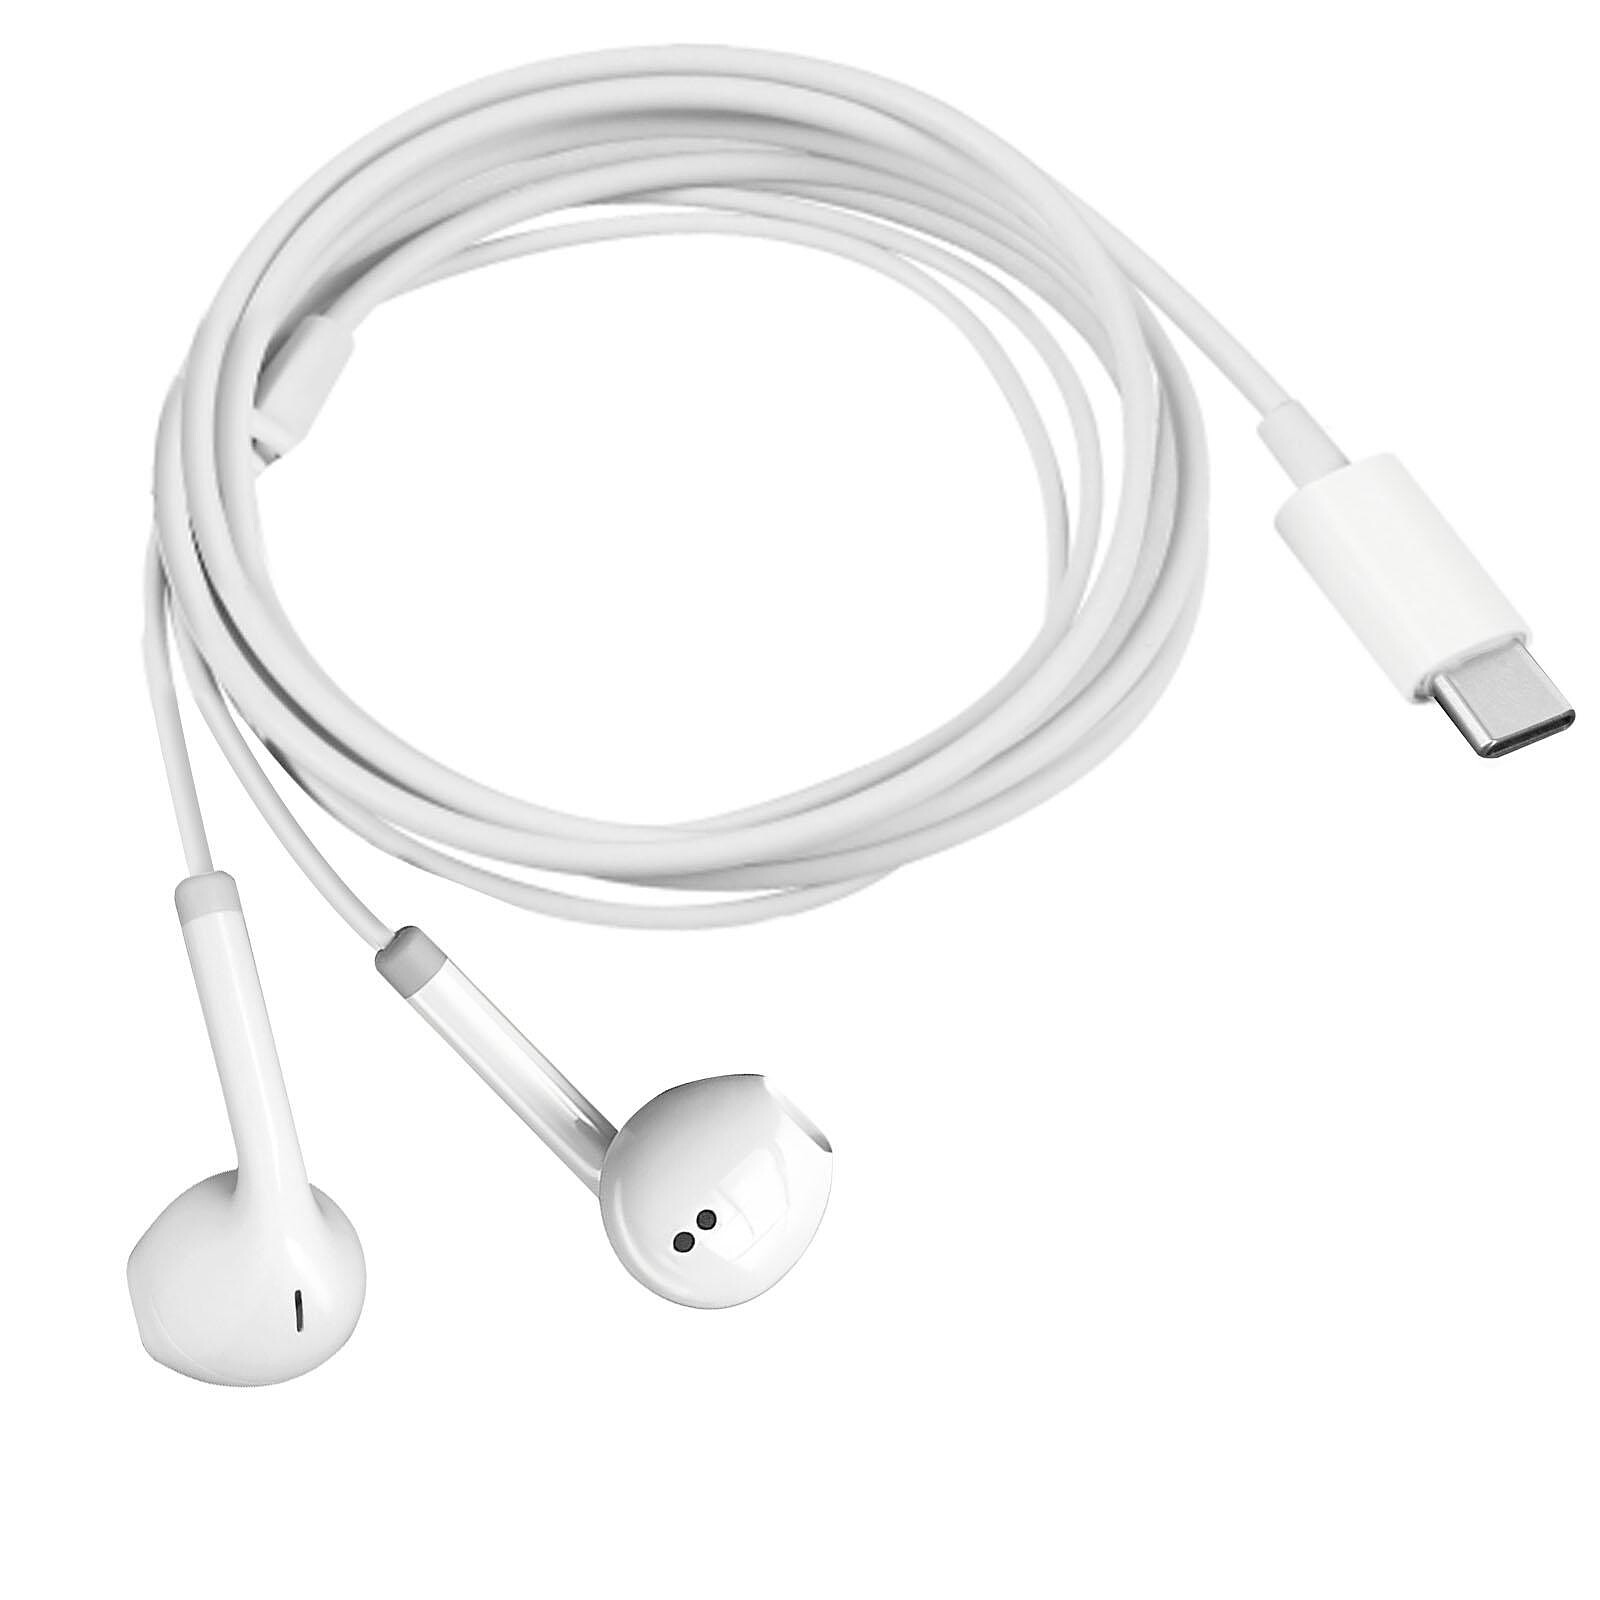 Ecouteurs Oppo Filaires USB C, Micro + Bouton Multifonction - Blanc